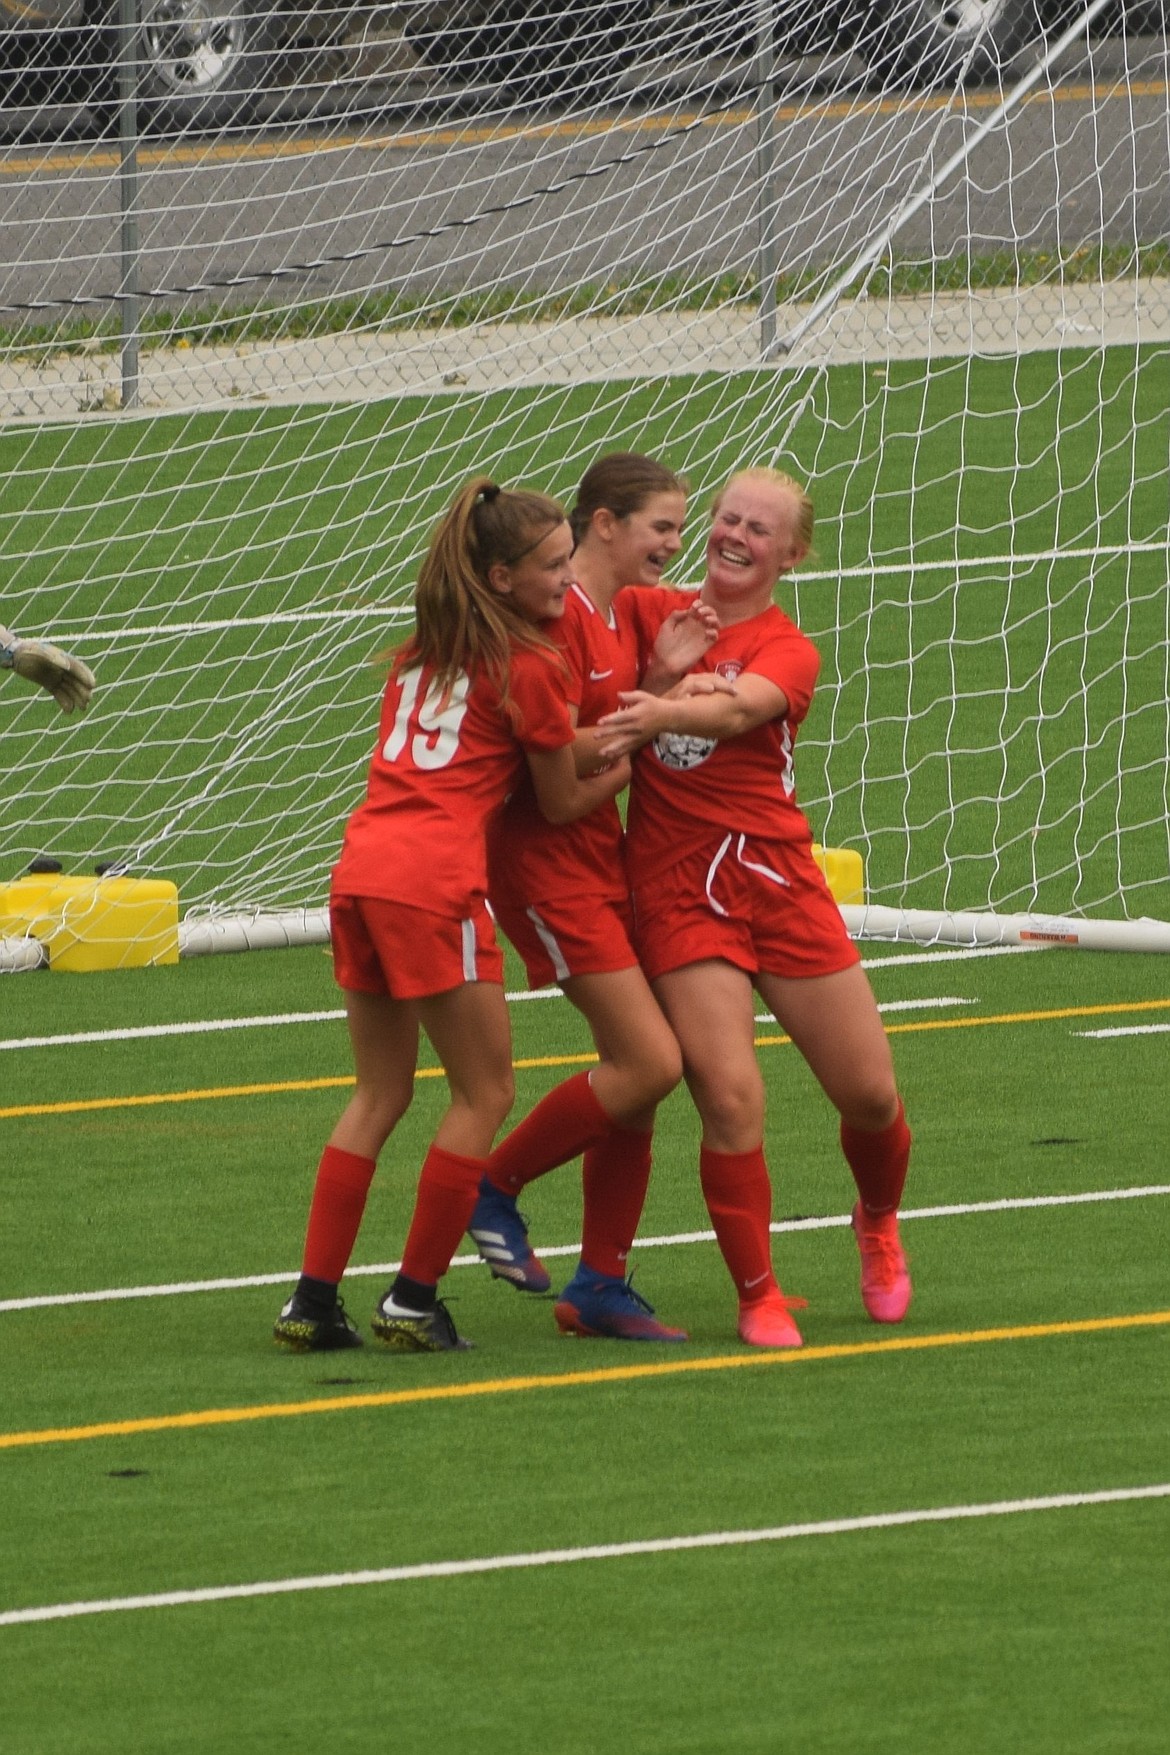 Photo by MARCEE HARTZELL
Natalie Thompson, left, and Kennedy Hartzell, right celebrate with Libby Morrisroe after Morrisroe scores from a breakaway assist from Hartzell. The Thorns North FC girls 07 soccer team started the Pend Oreille Cup off great, beating EW Surf G07 WNPL 2-0 in the first of three games, before the AQI rose to a level that forced the tournament to cancel. The Thorns' other goal was scored by Rachel Corette (Kennedy Hartzell).